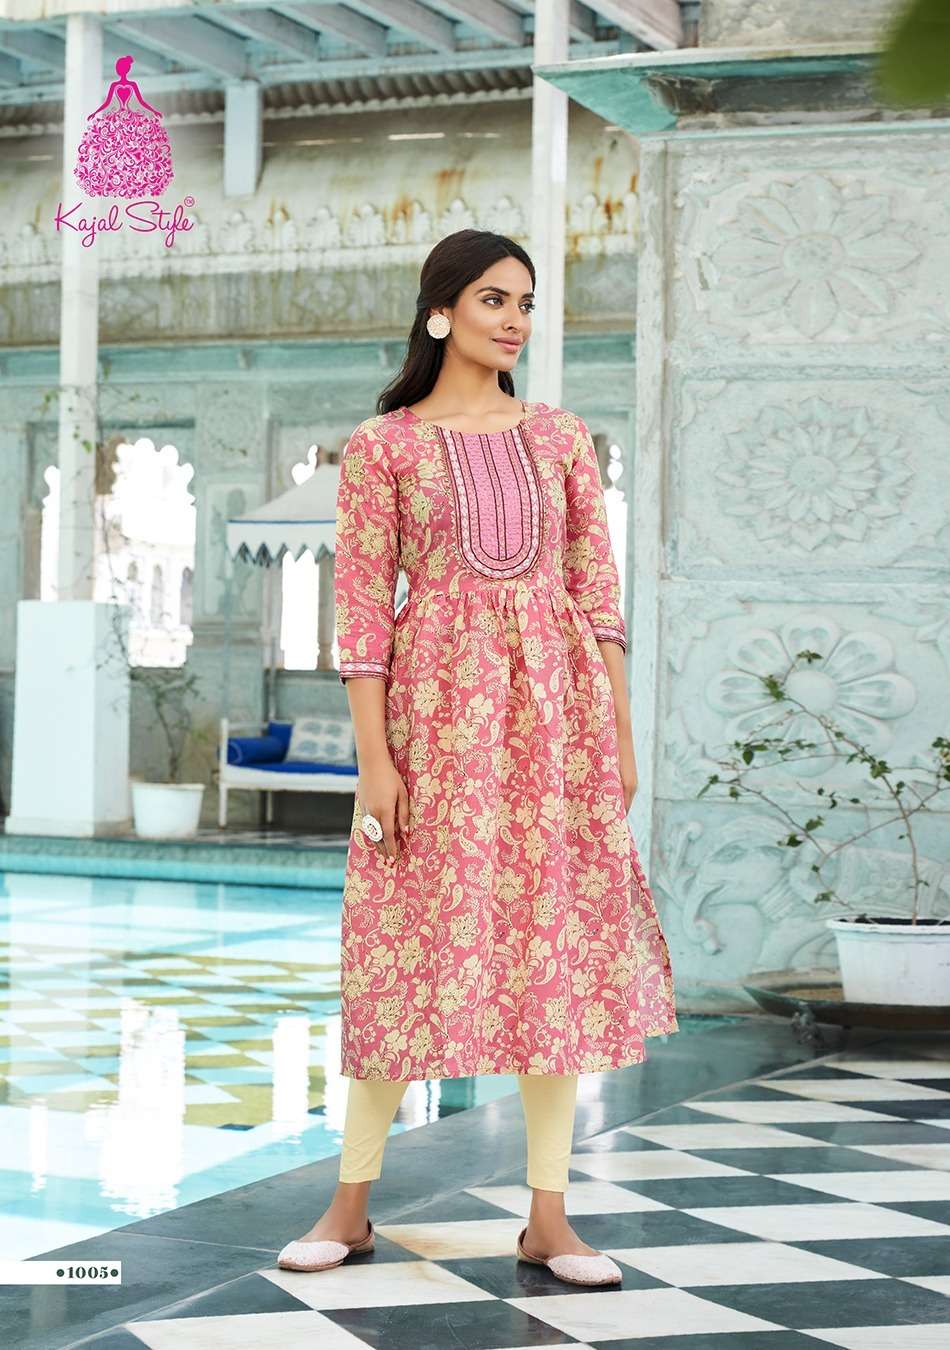 presenting new collection in afghani pattern beautiful kurtis beautiful  sikka n lace work on yoke paired with afghani readymade kurtie with pant